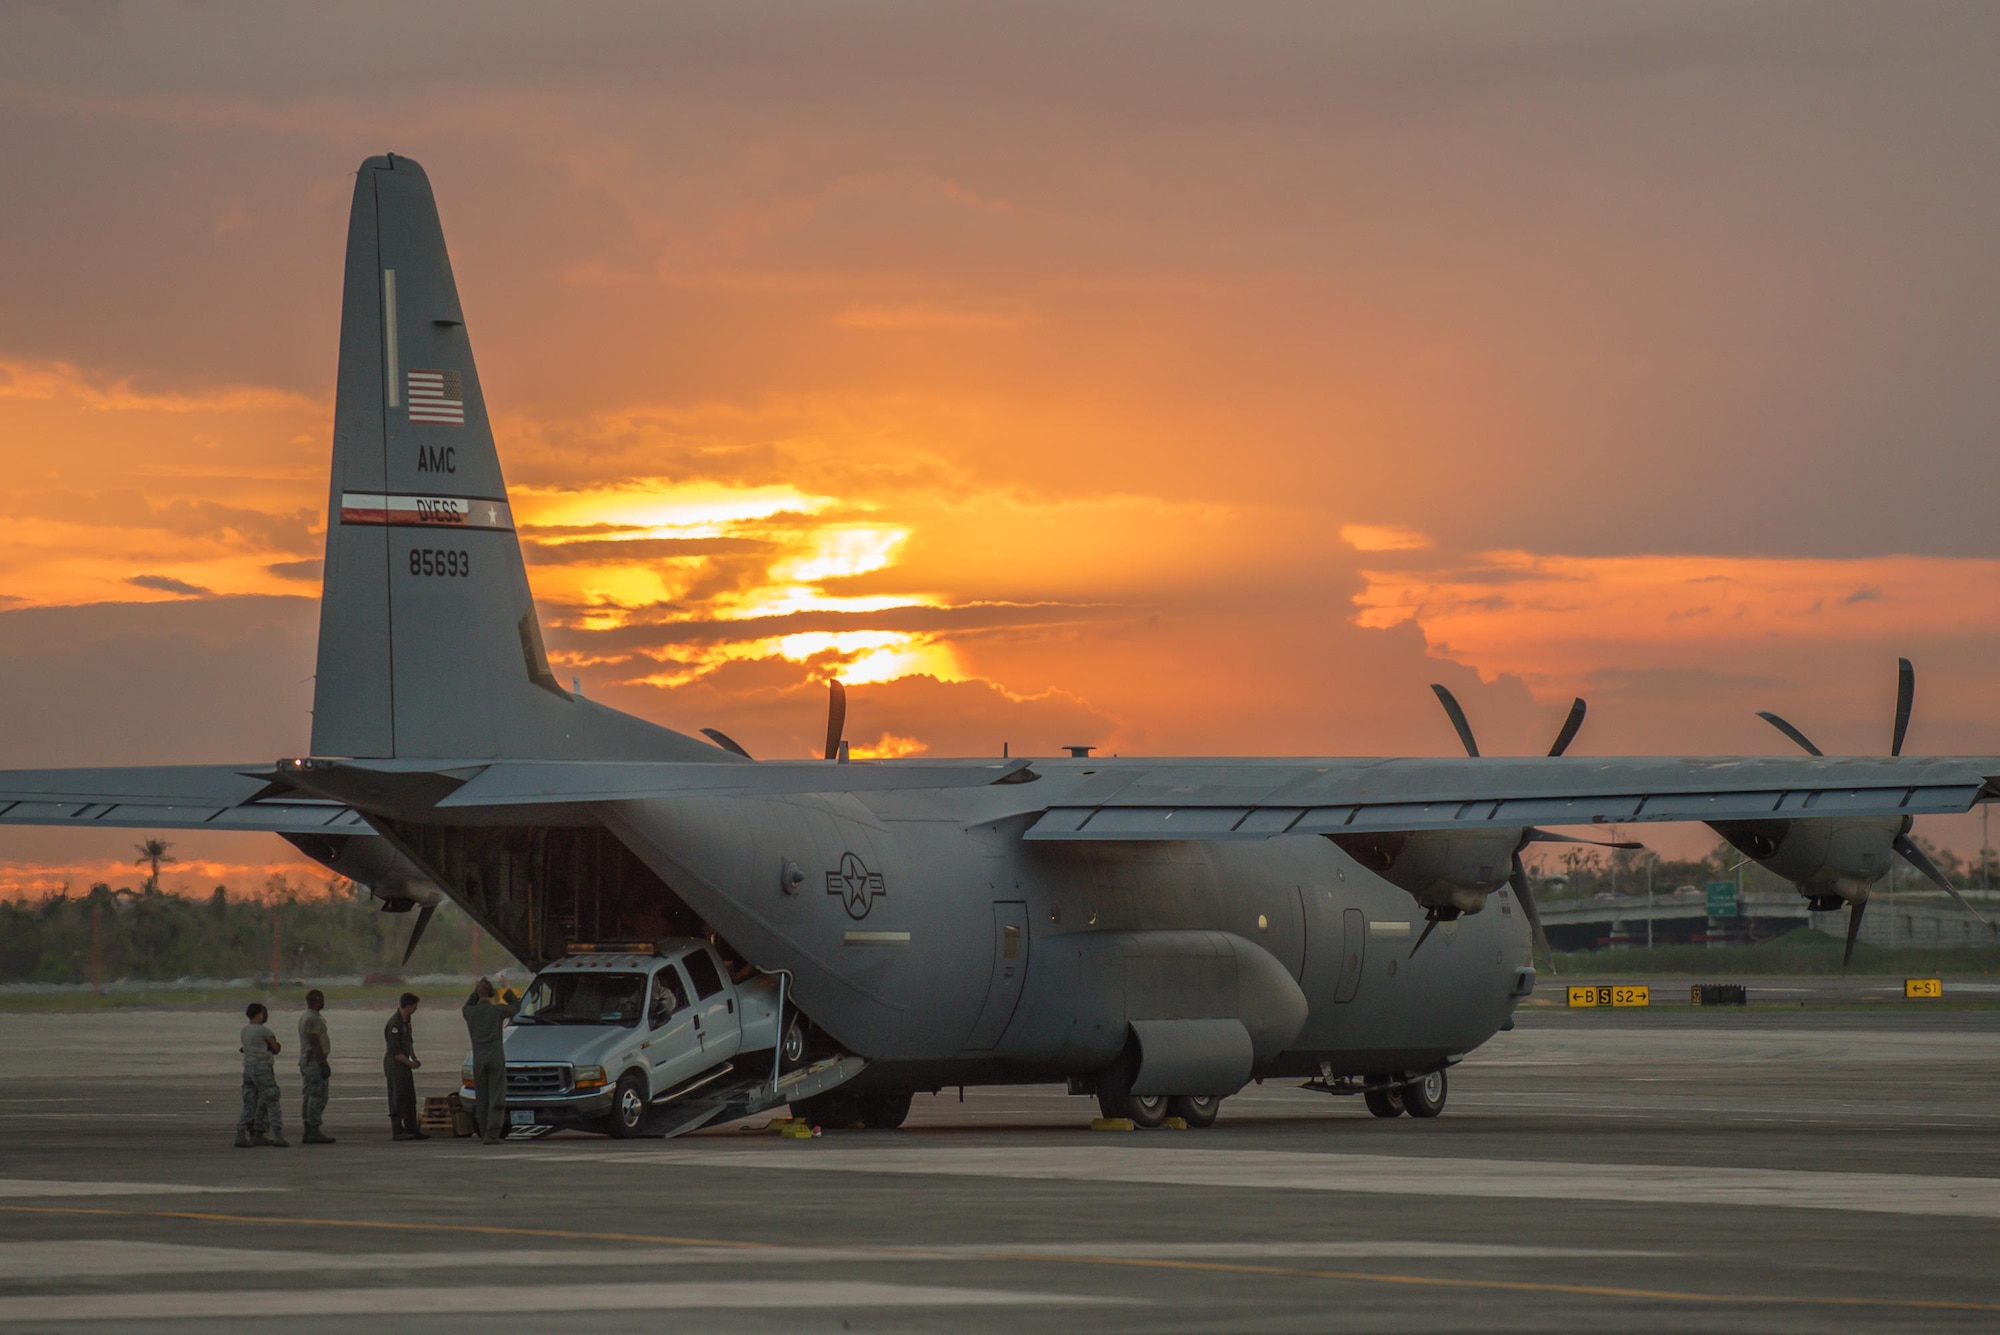 Airmen from the Kentucky Air National Guard’s 123rd Contingency Response Group, augmented by troops from the active-duty Air Force and Air National Guard units in multiple states, dowload relief equipment from a C-130 Hercules aircraft at Luis Muñoz Marín International Airport in San Juan, Puerto Rico, in the wake of Hurricane Maria Oct. 6, 2017. The unit’s Airmen established an aerial port of debarkation upon arrival here Sept. 23, and have processed more than 7.2 million pounds of cargo and humanitarian aid for distribution in the first three weeks of the operation. (U.S. Air National Guard photo by Lt. Col. Dale Greer)